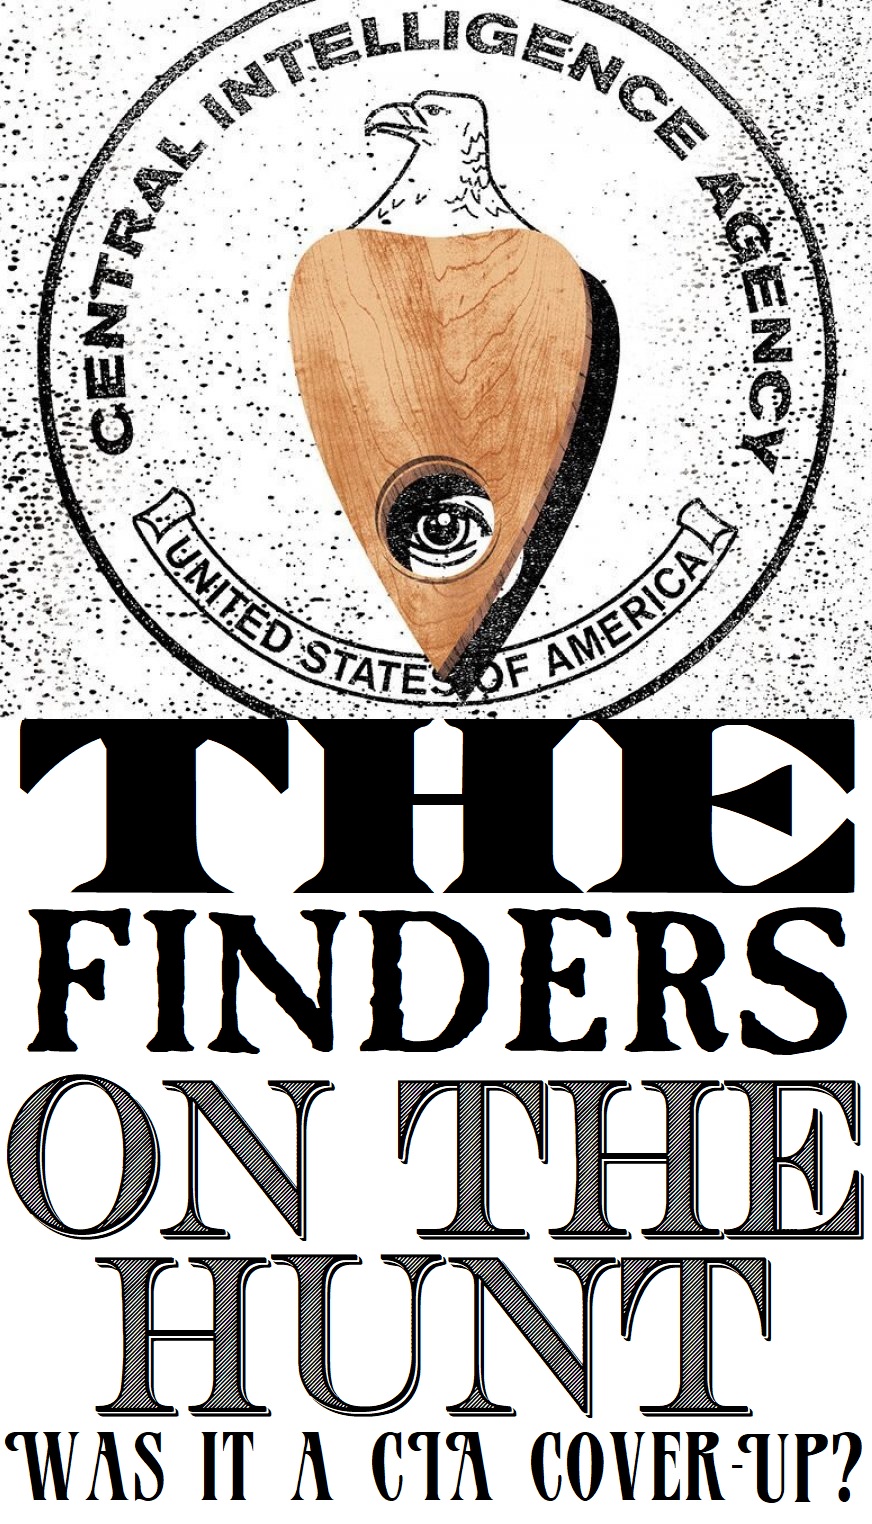 Was 'The Finders Cult' Covered-Up By The CIA?